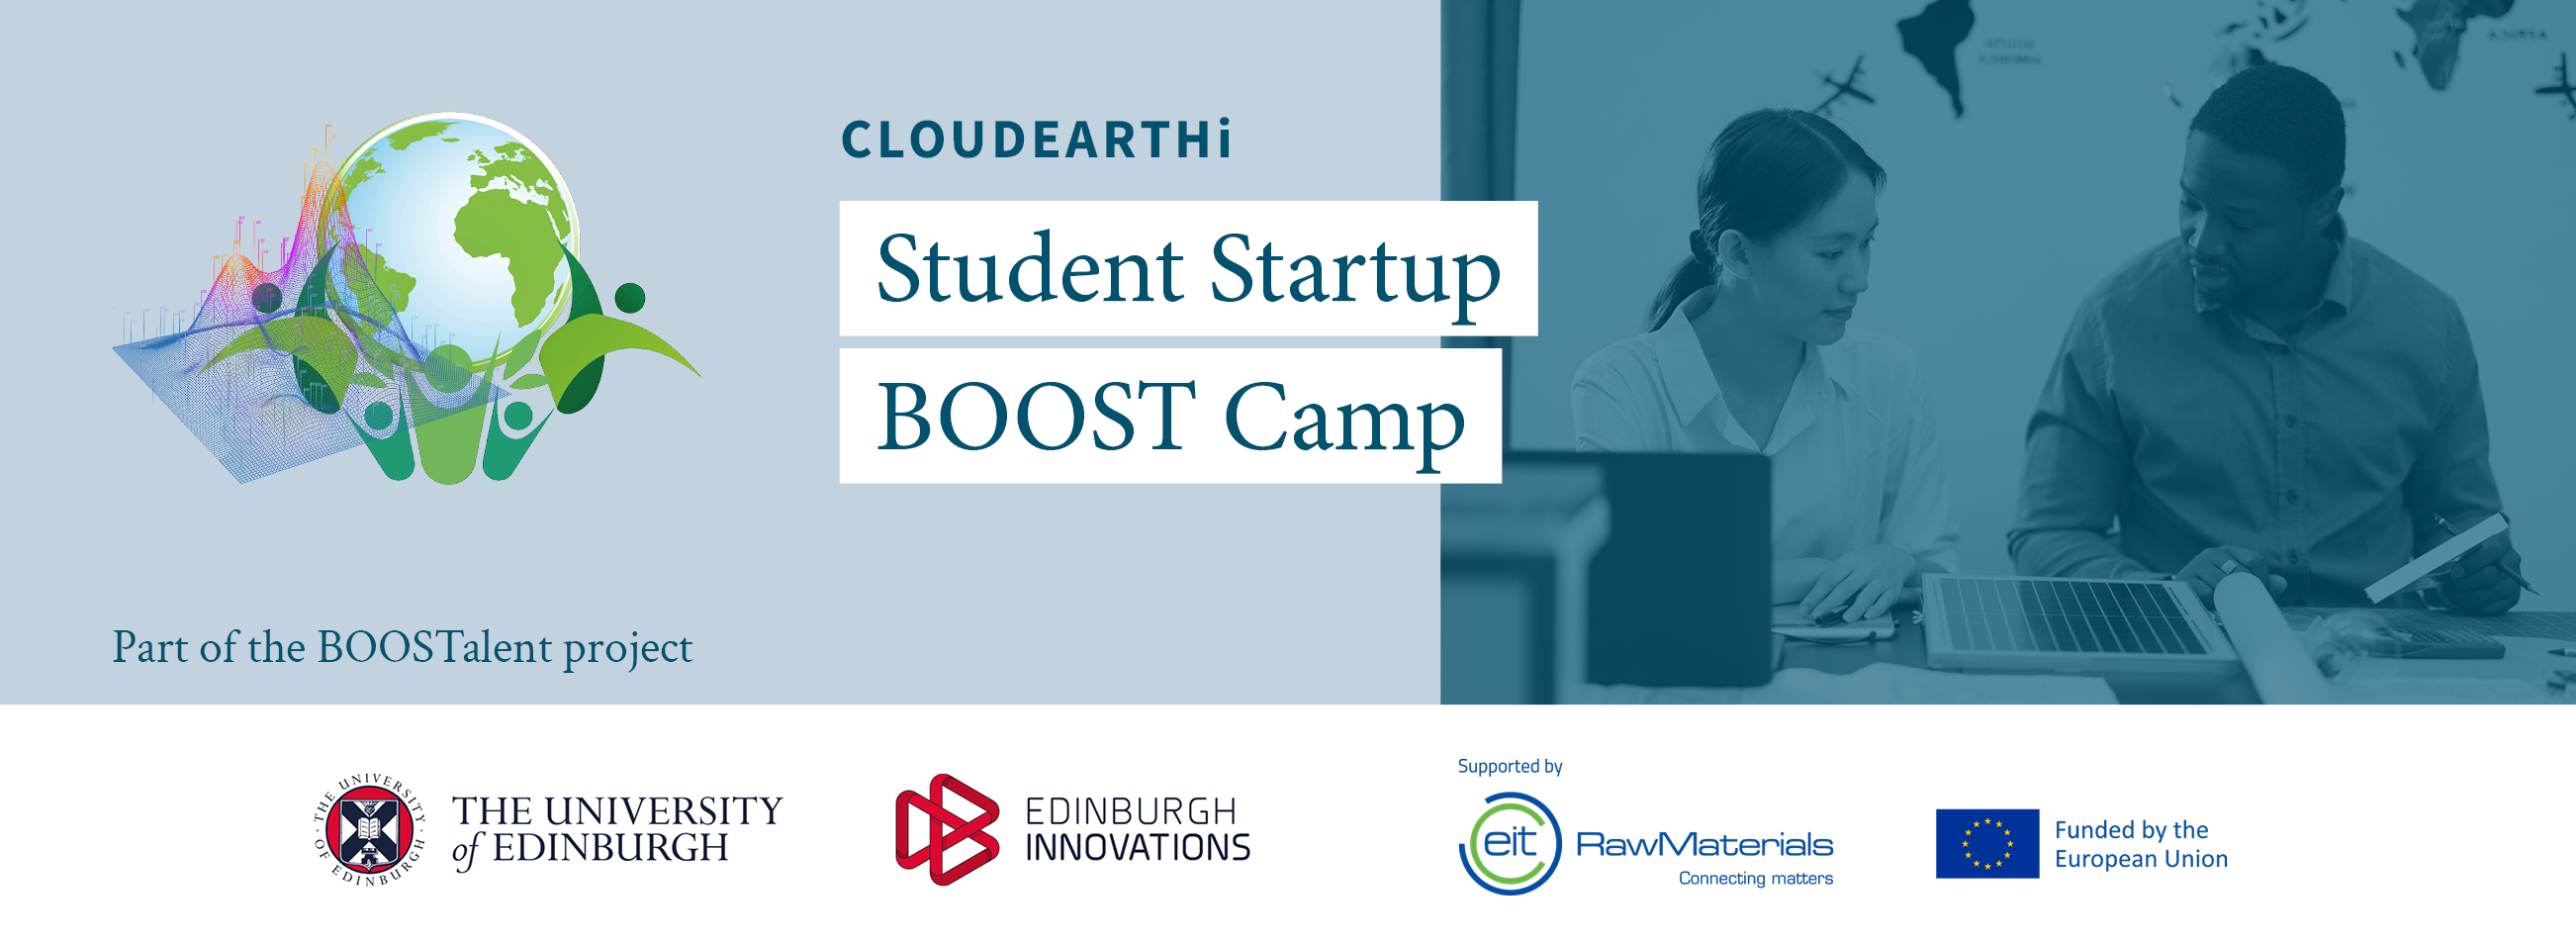 23CEI05_Student_Startup_BOOST_Camp_IRM.jpg